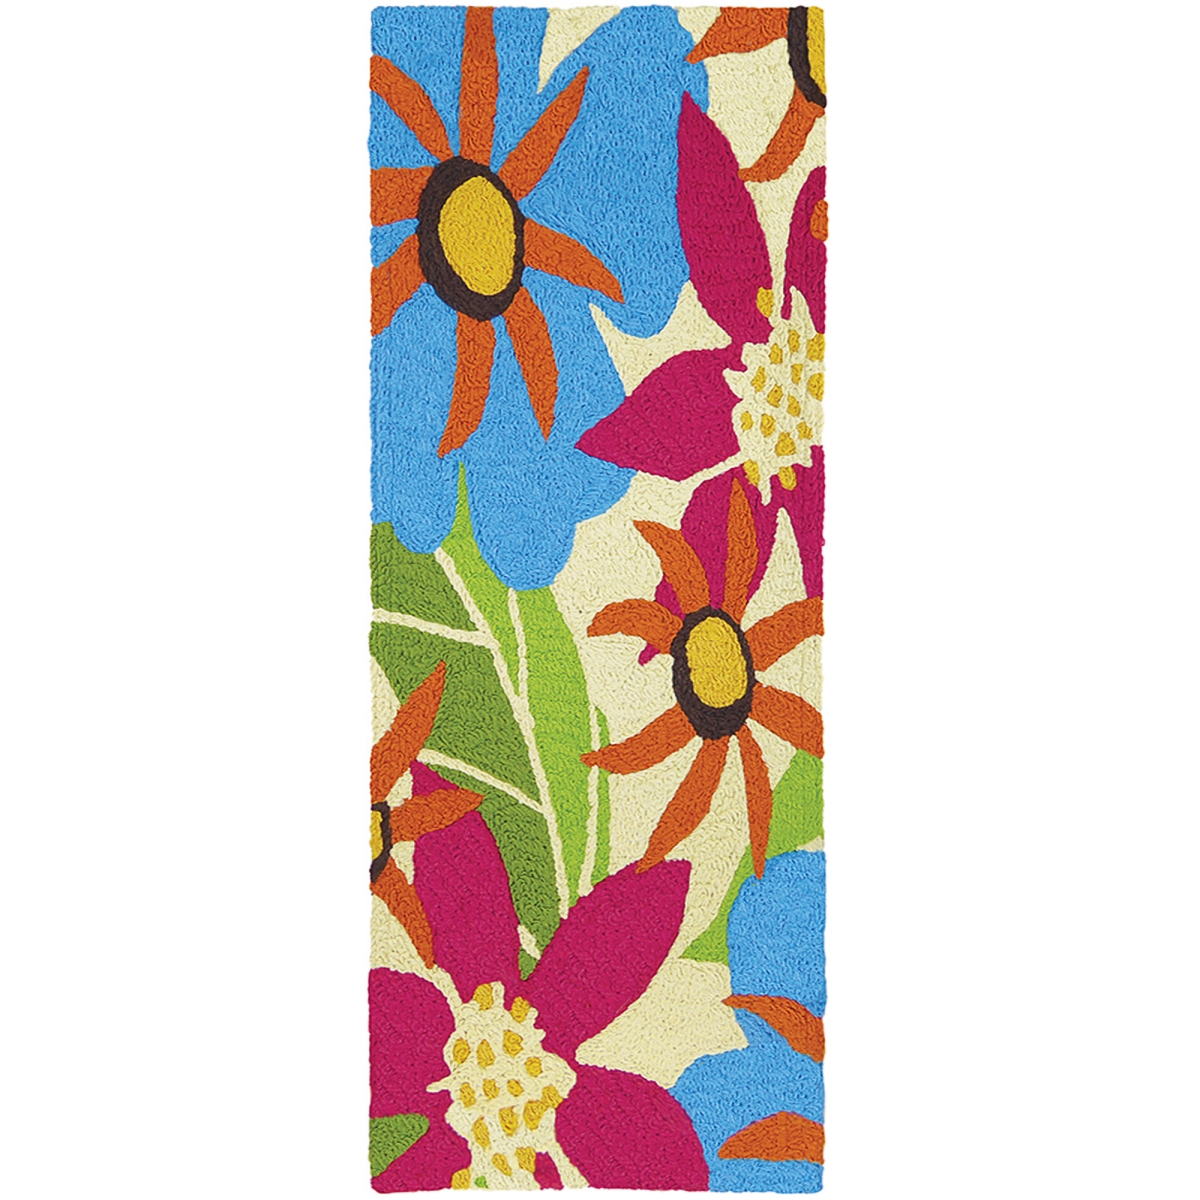 Jio-hd019j 21 X 54 In. Piccadilly Floral Indoor & Outdoor Area Rug